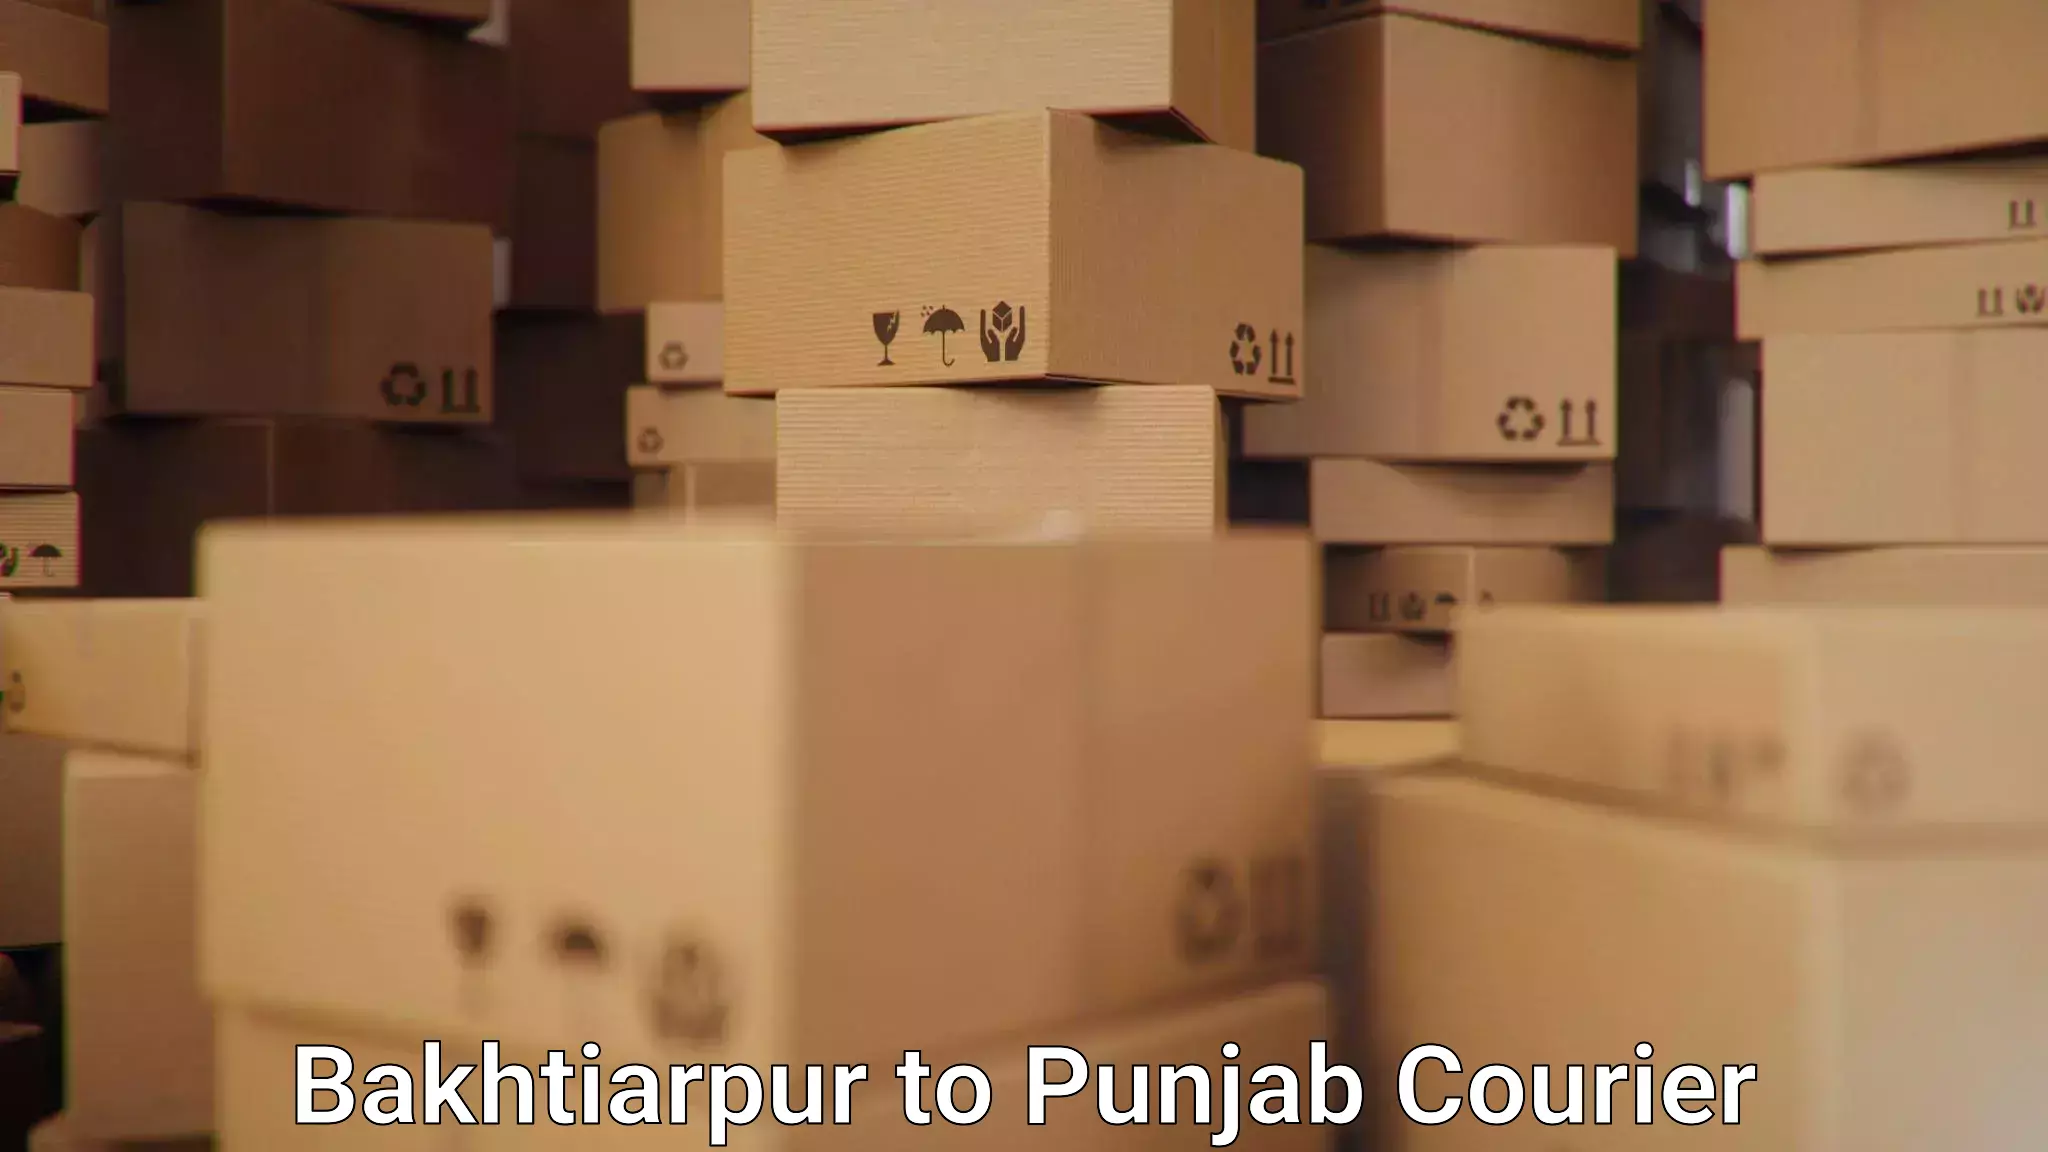 Reliable courier services in Bakhtiarpur to Batala